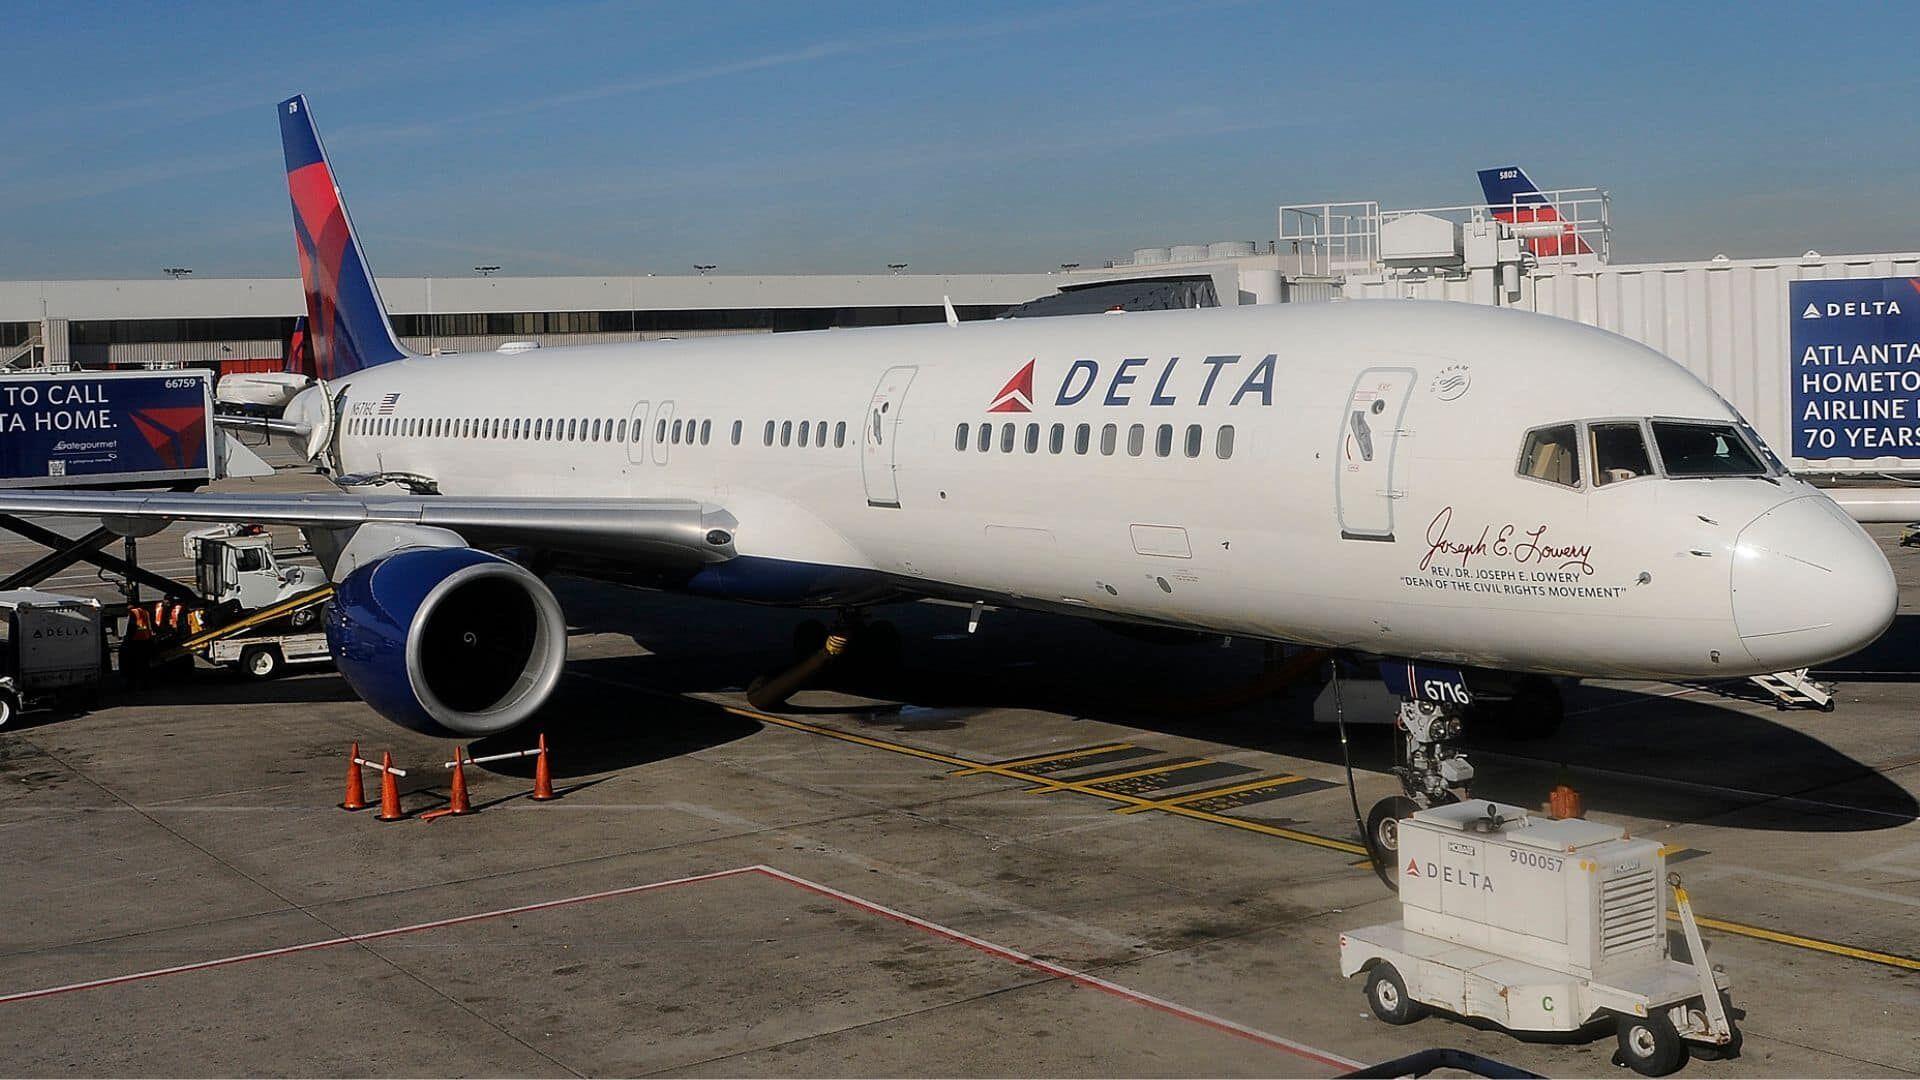 Delta Air Lines Just Made an Unprecedented Change That Should Make  Customers Very Happy. Every Airline Should Follow Its Lead